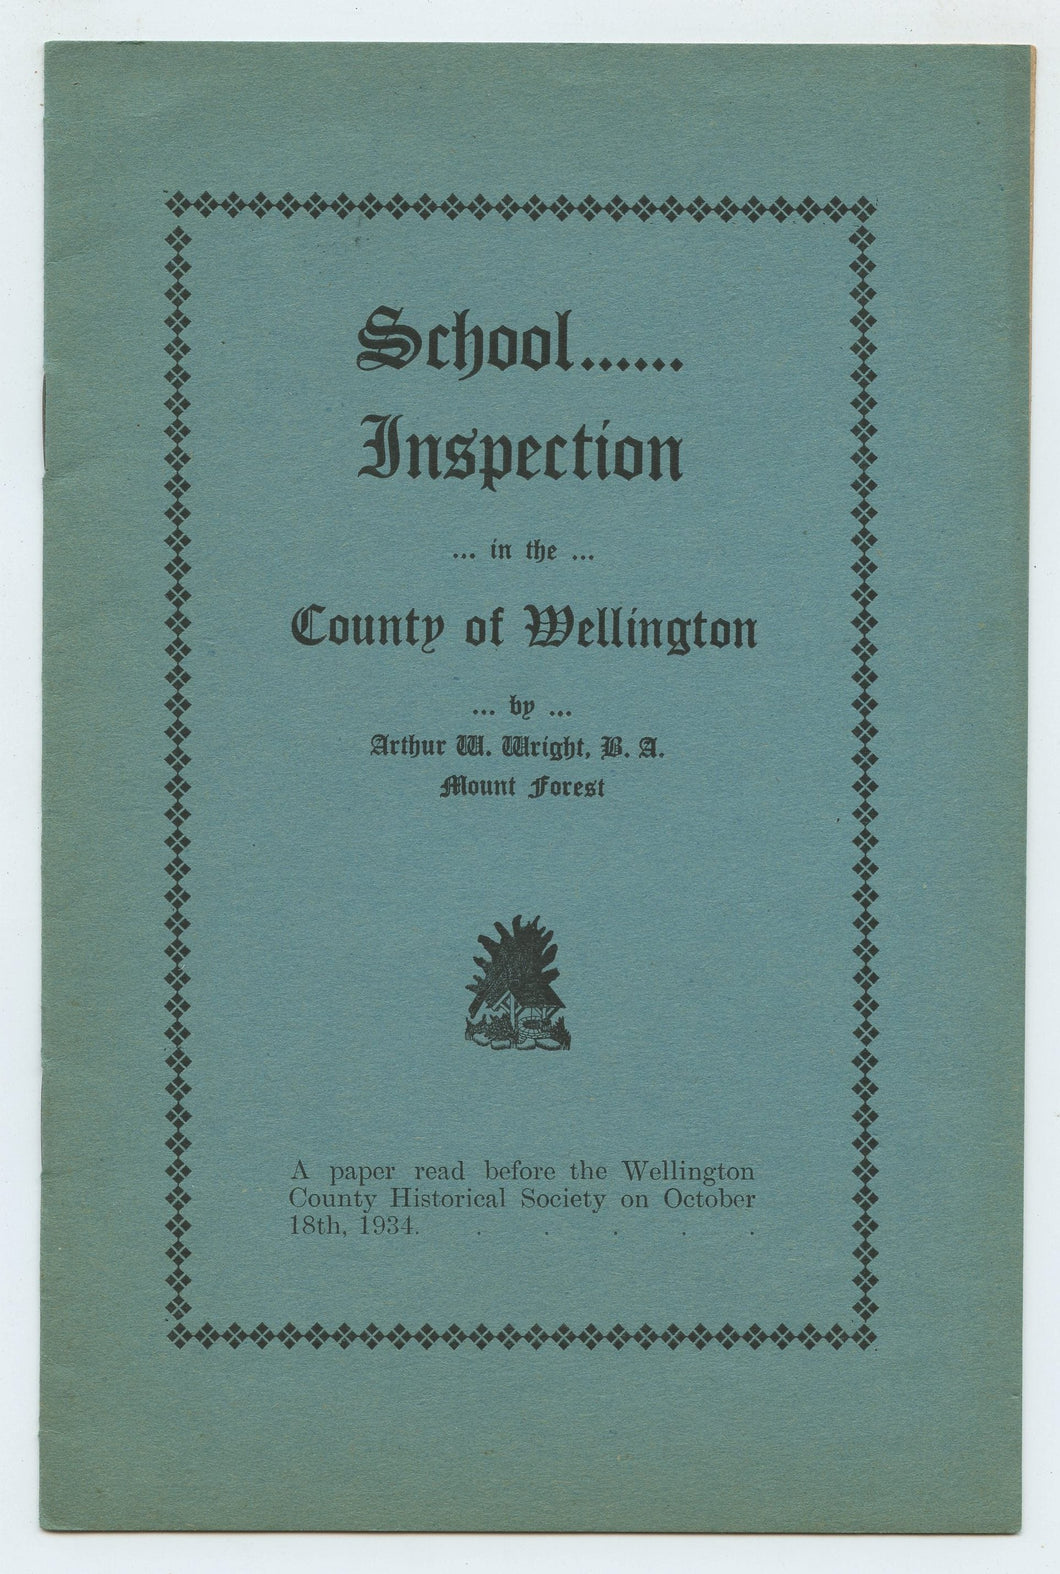 School ..... Inspection .. in the ... County of Wellington